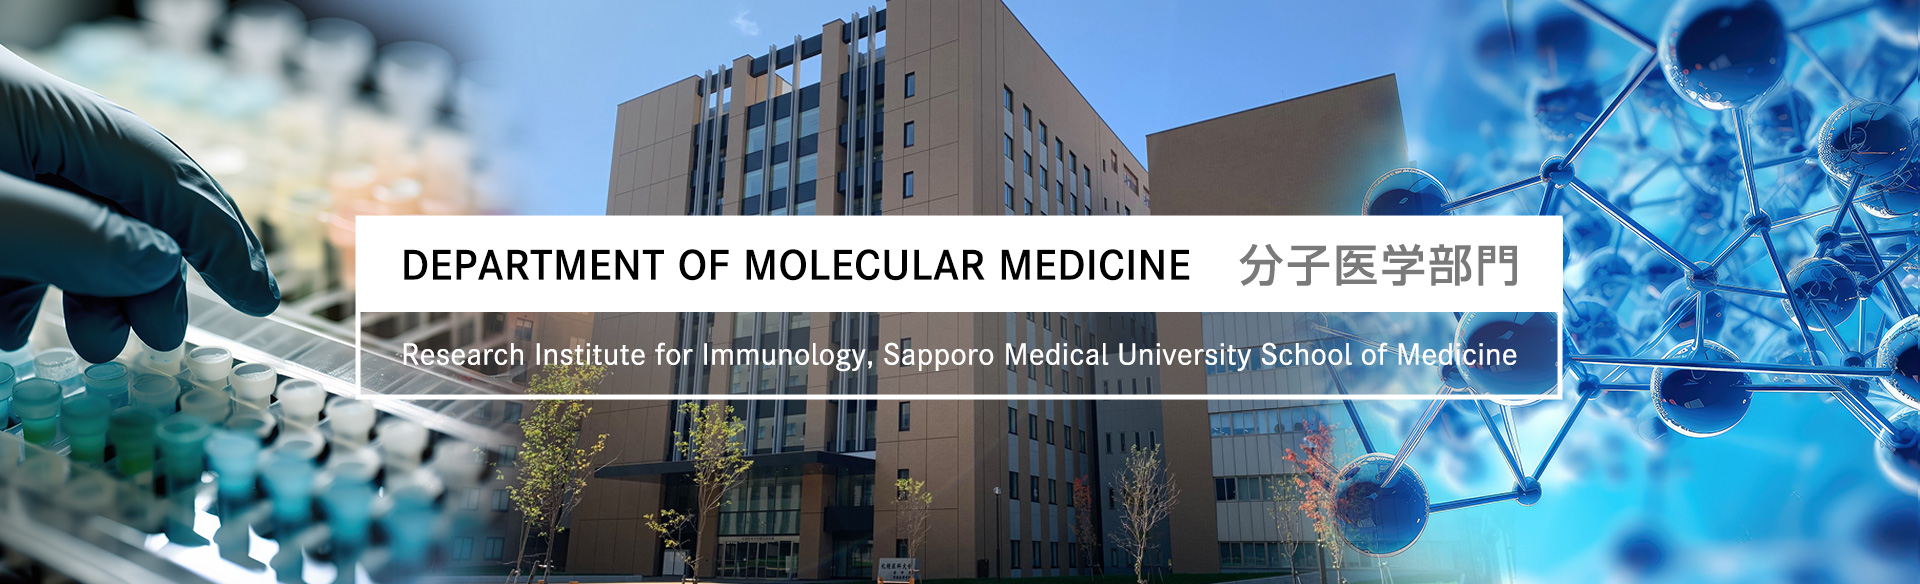 Department of Molecular Medicine　分子医学部門 / Research Institute for Immunology, Sapporo Medical University School of Medicine